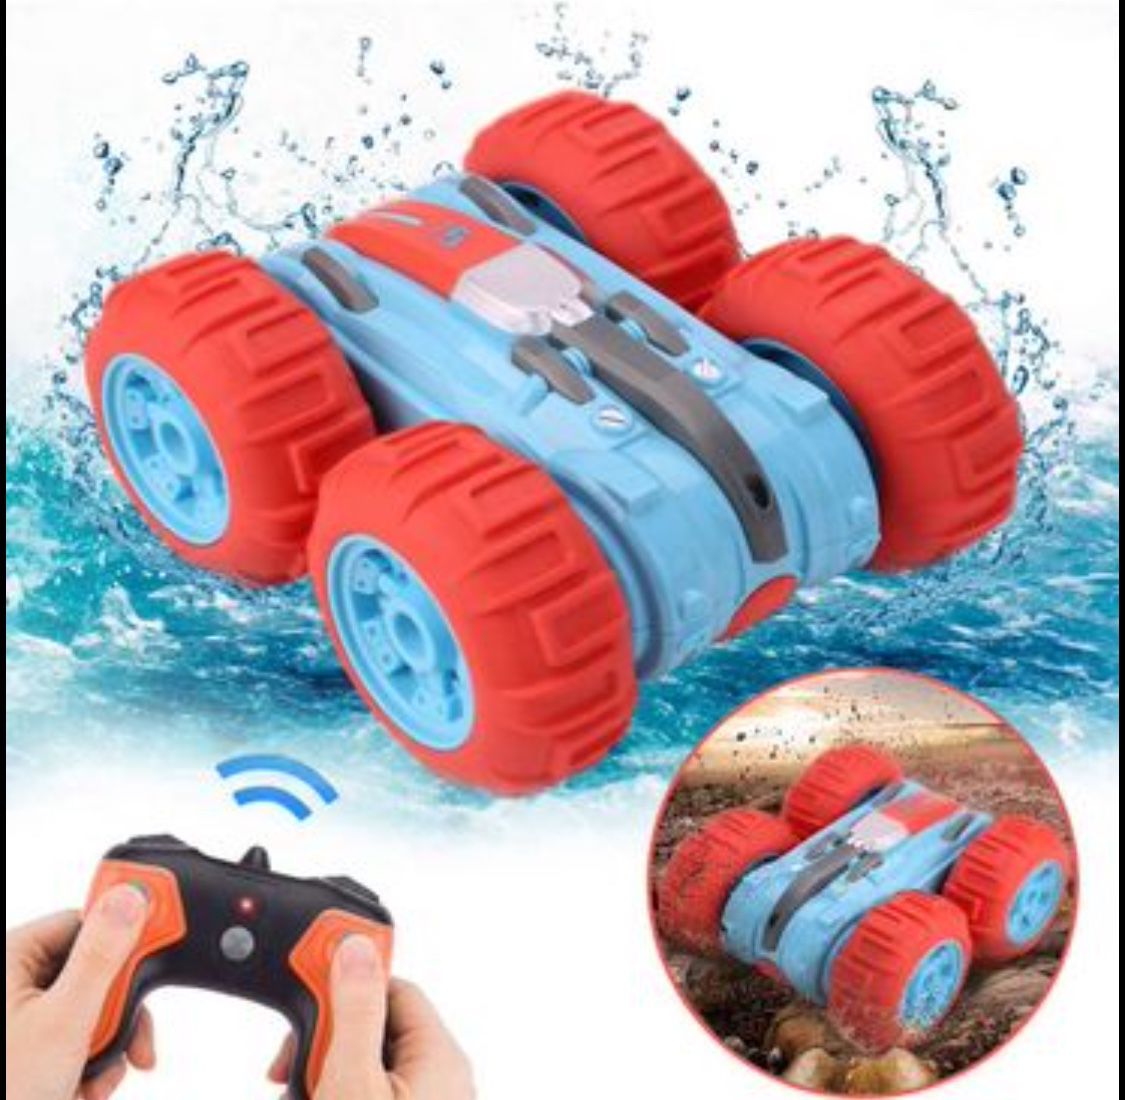 Waterproof Amphibious Remote Control Car 2.4 GHz Stunt Car for Girls 4WD All Terrains Water Land Beach Swimming Pool Toy  New  Pick up at Redmond  Cle